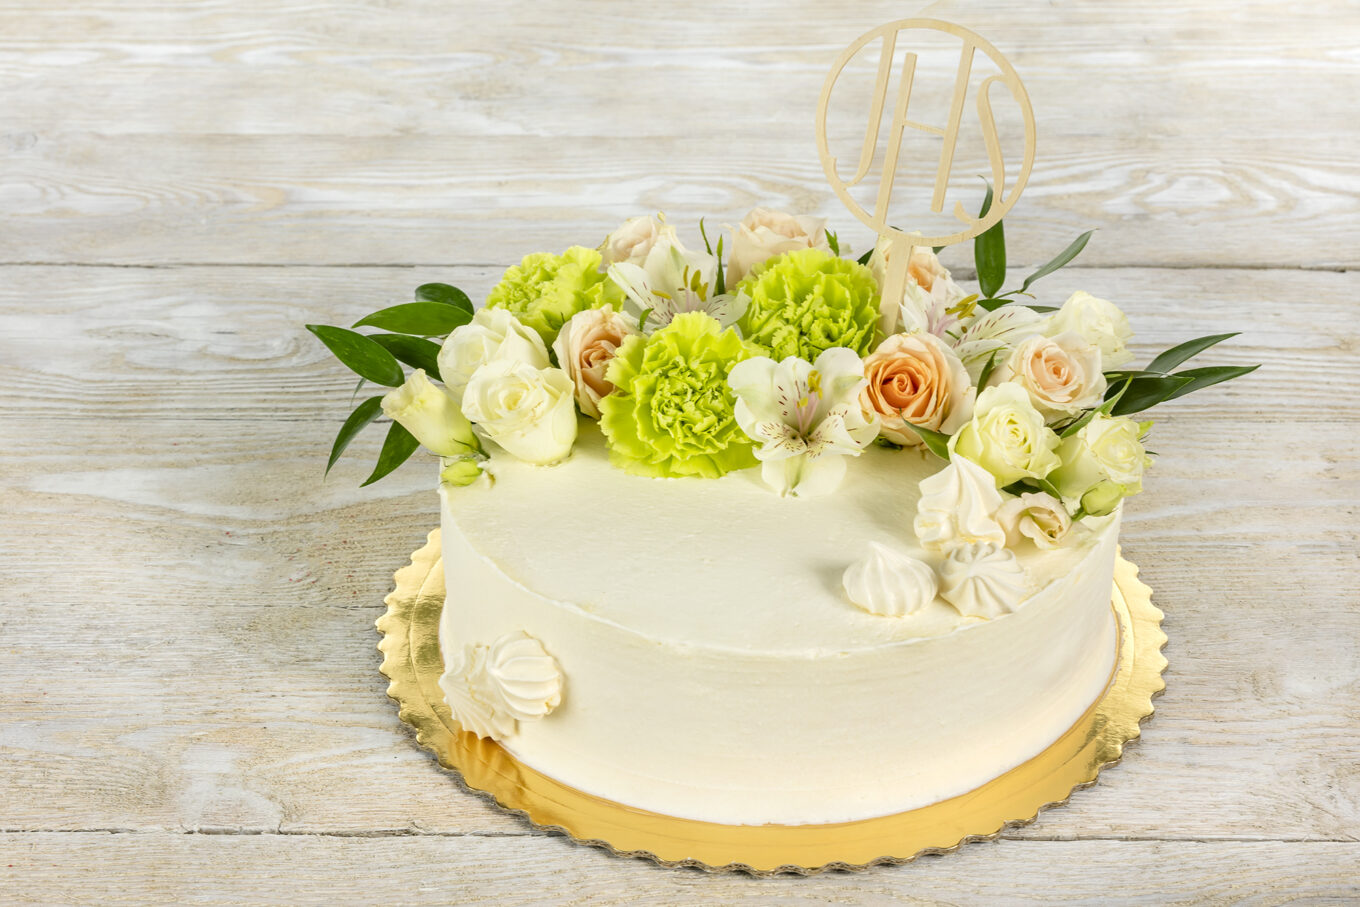 Round cake with flowers for communion. Cukiernia Jacek Placek is synonymous with the taste of homemade cakes made of natural products.